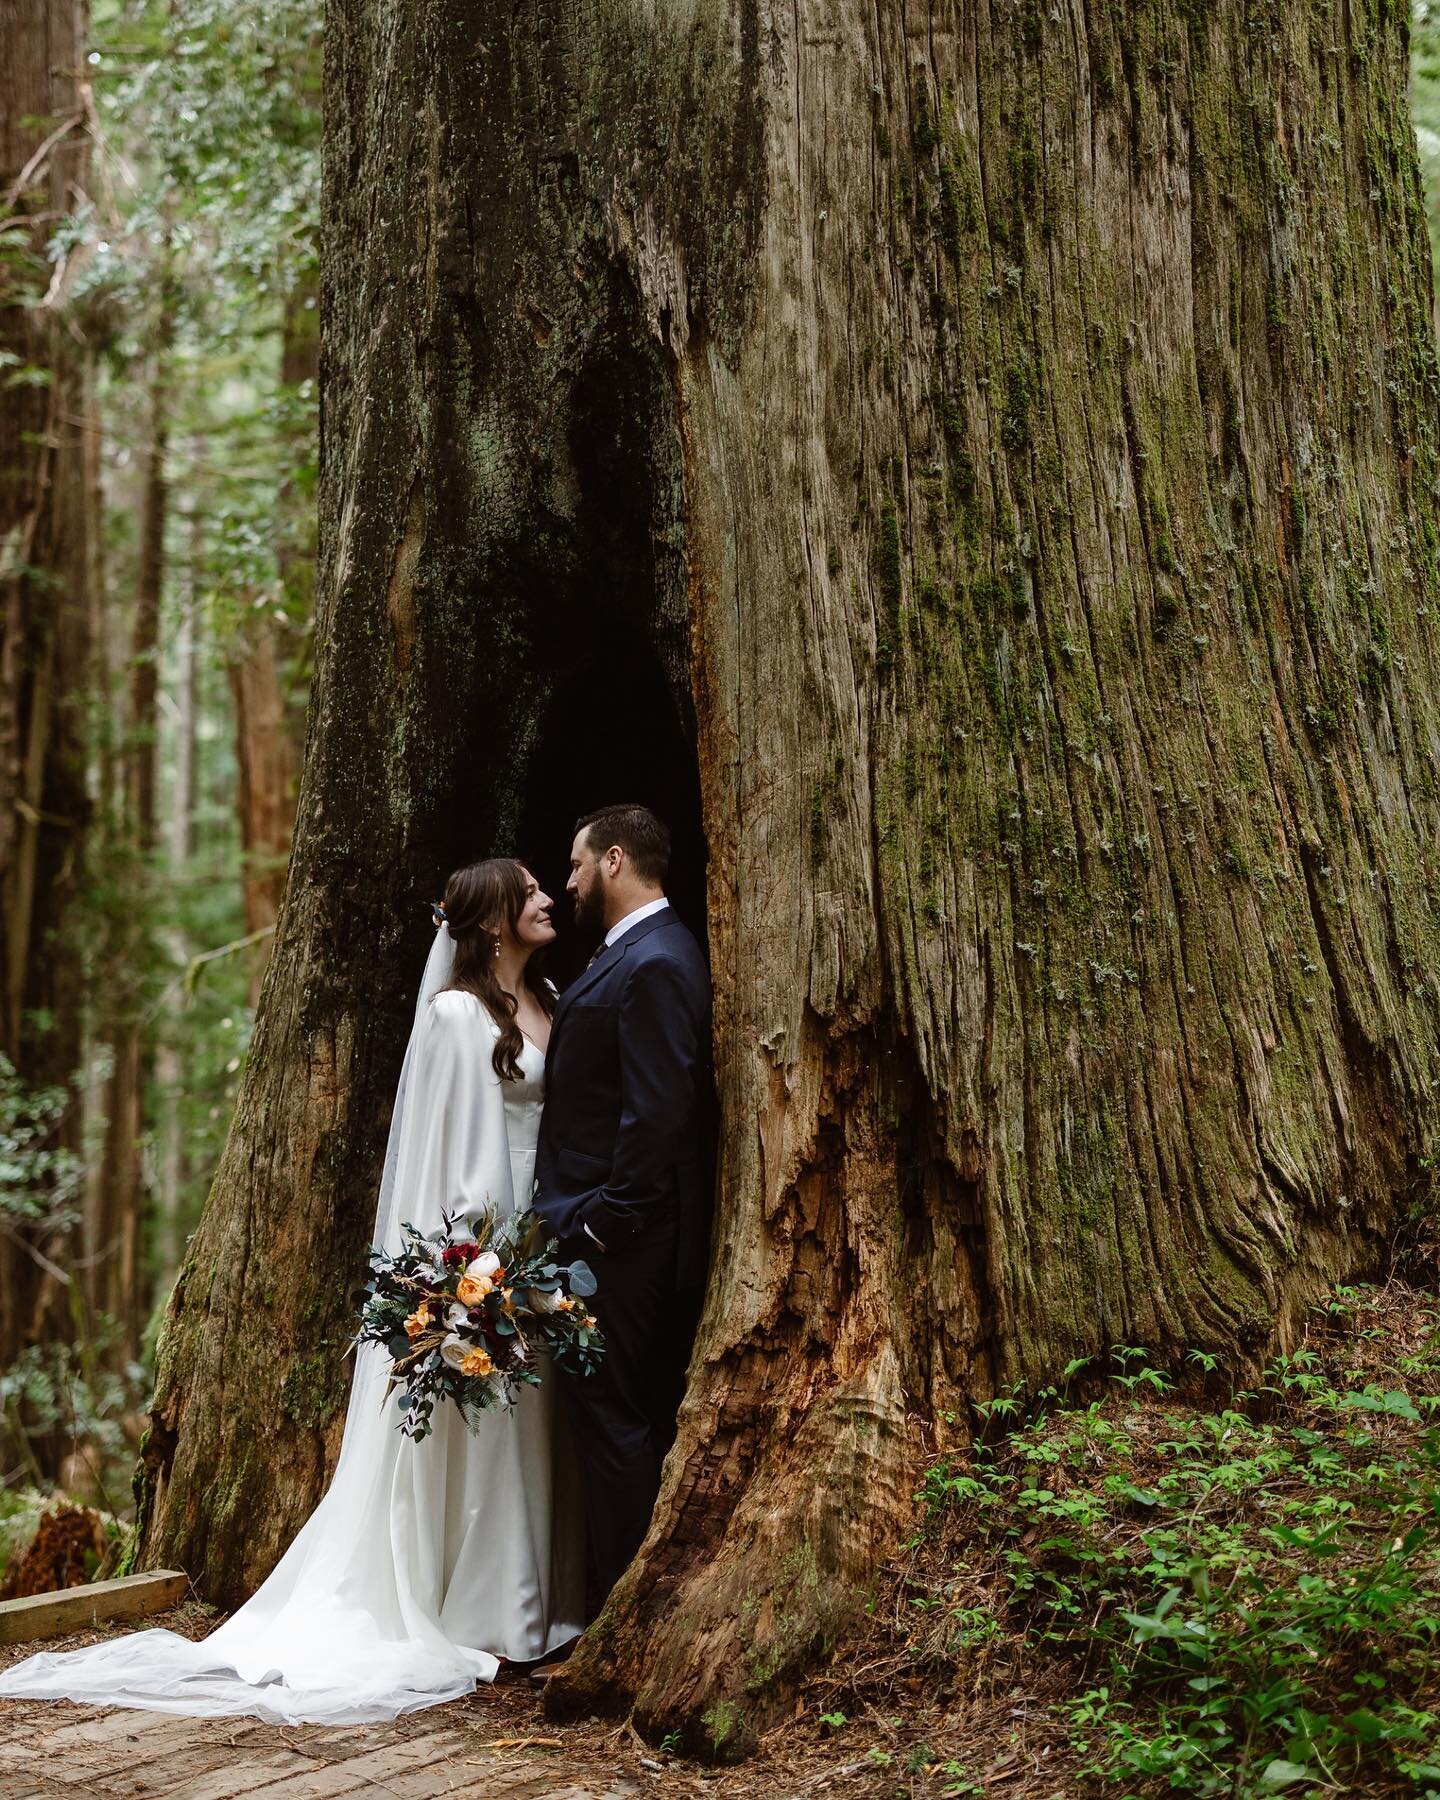 Summarizing this elopement in a single post just isn&rsquo;t possible, but what I can say is that this day, this setting, these two &amp; their love and joy is why I love this job so much. 

Thank you to C &amp; S for trusting me with your day, it wa